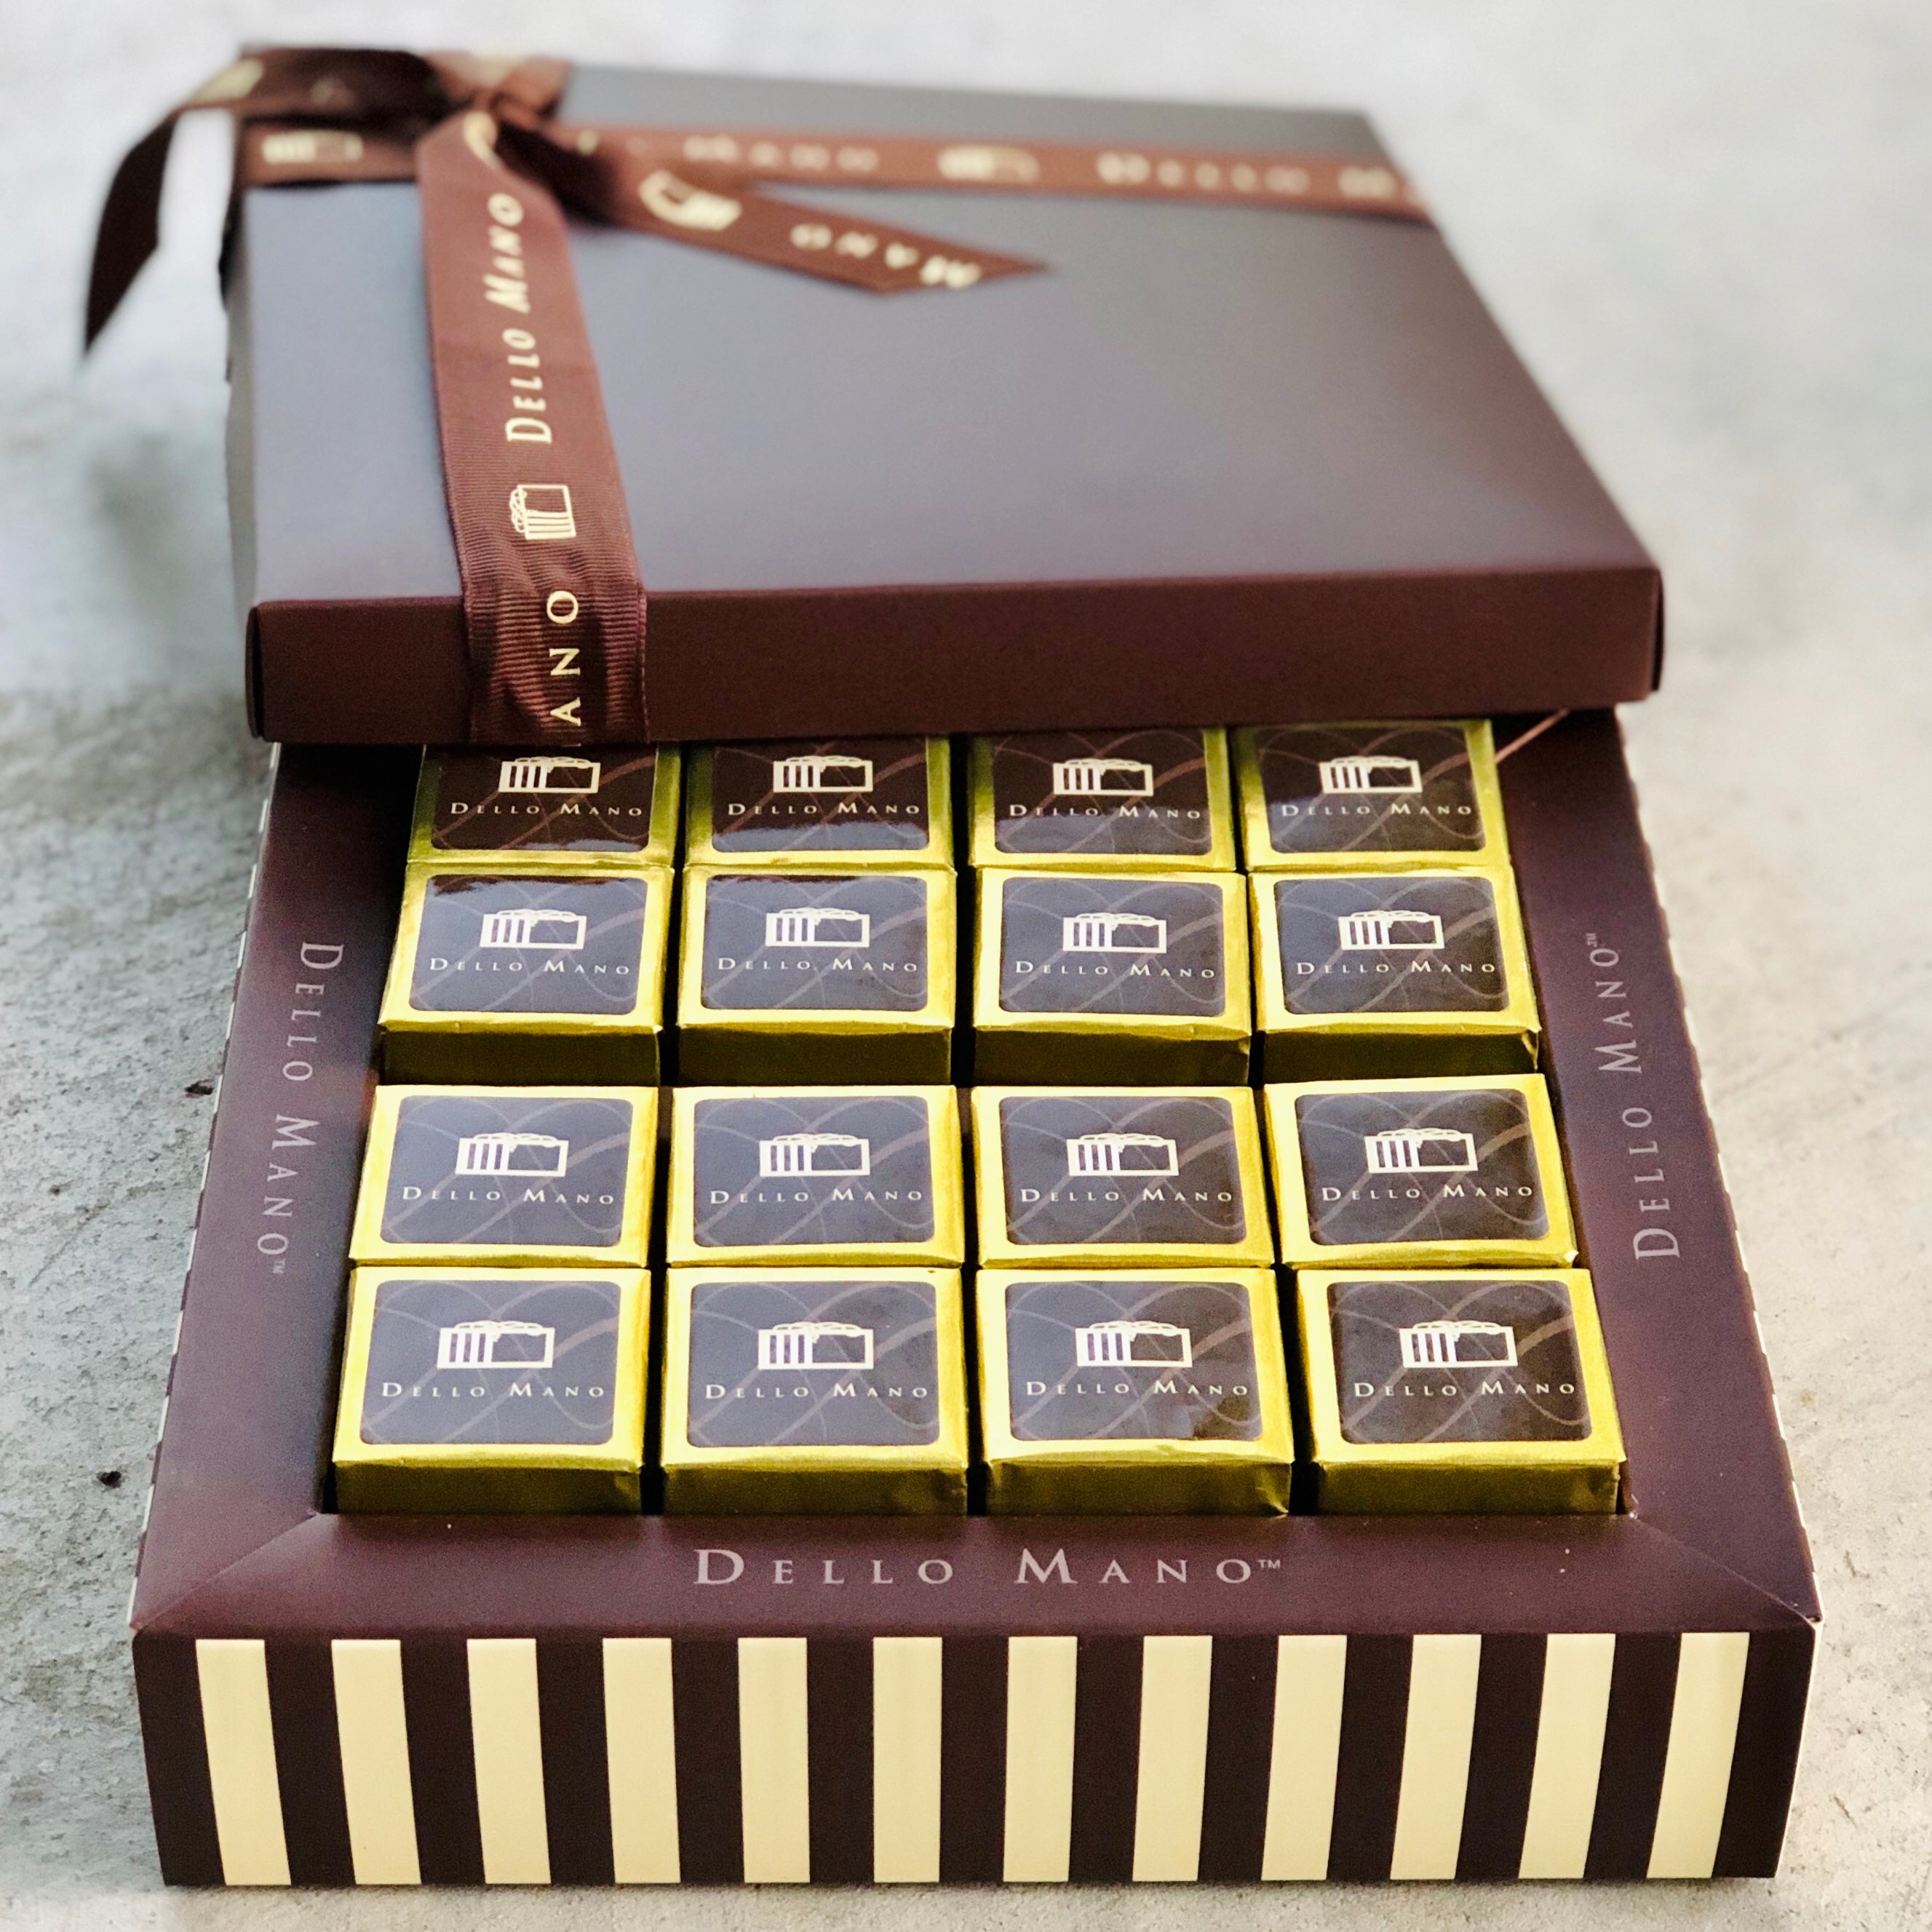 16 pieces of gold foiled Classic Brownie in a  beautiful striped Chocolate gift box. The box has Dello Mano written on it. The lid is off the box and is tied with brownie ribbon